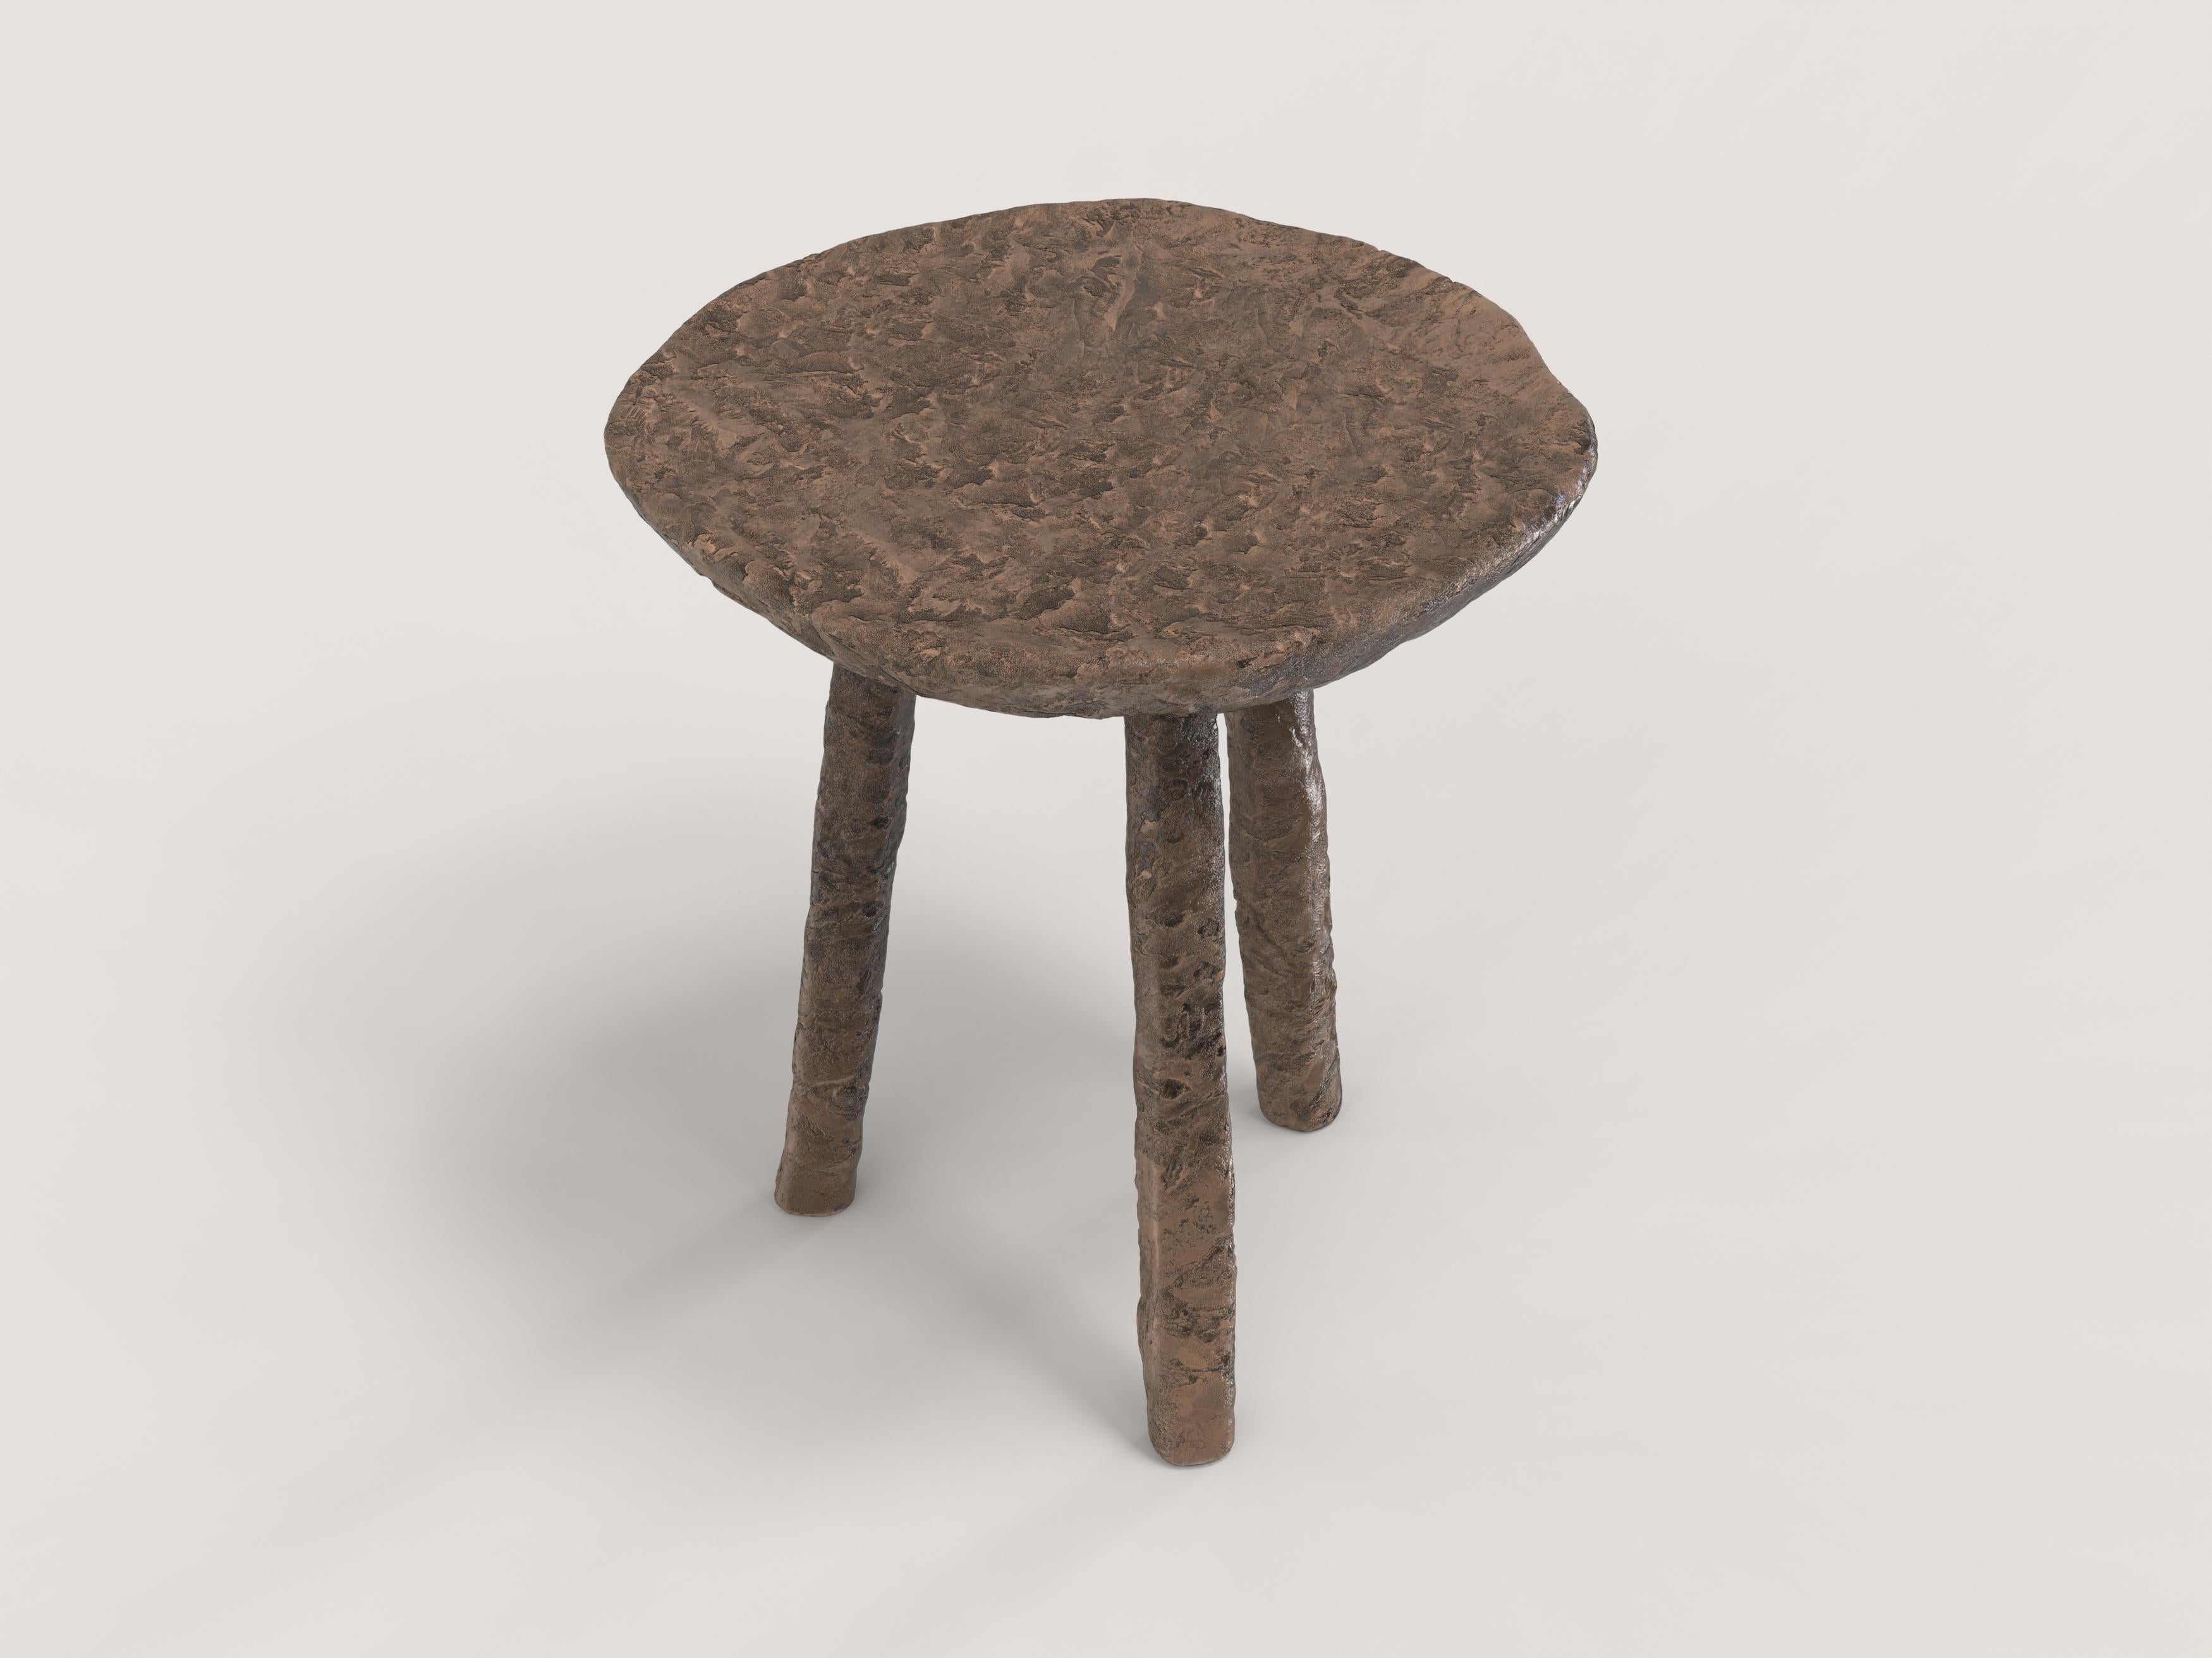 Comma V1 is a 21st Century stool made by Italian artisans in cast bronze. It is part of the collectible design language Comma that has been developed by the Edizione Limitata's art research team in Milan. 

Limited edition of 150.
Every piece has a